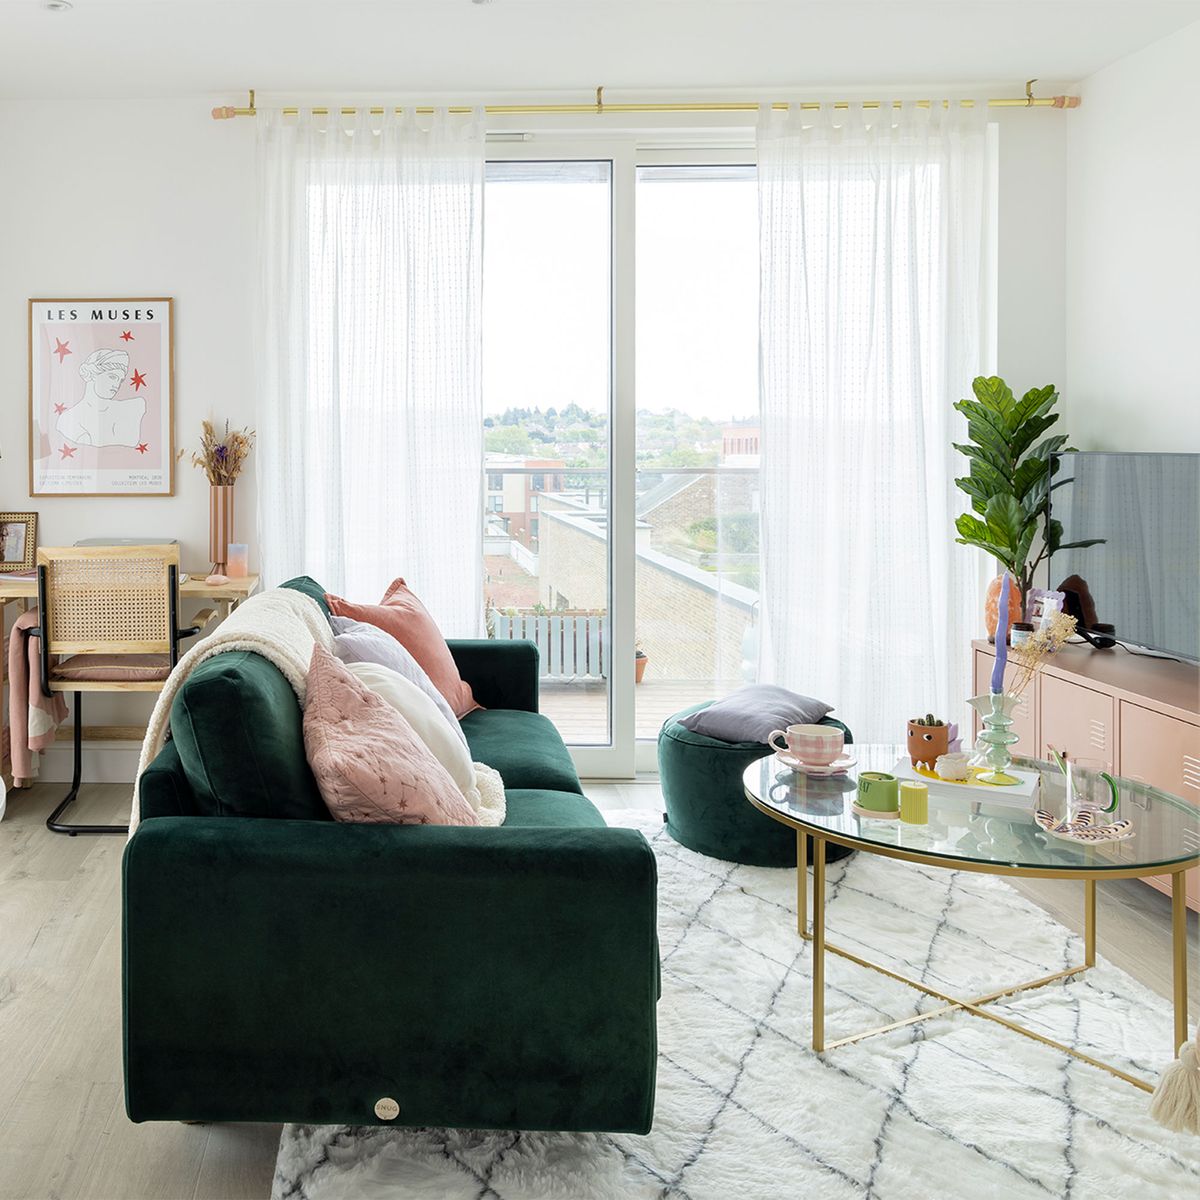 ‘I’ve used #LandlordFriendly hacks to make it my own!’ says this colour-happy #London #Renter. 🏠

Living in a #Rental can be limiting in terms of what you can and can’t do to the #Property in terms of #RentalDecoratingIdeas.

tinyurl.com/2f24czyf

#RentalFriendly #RentalDecor